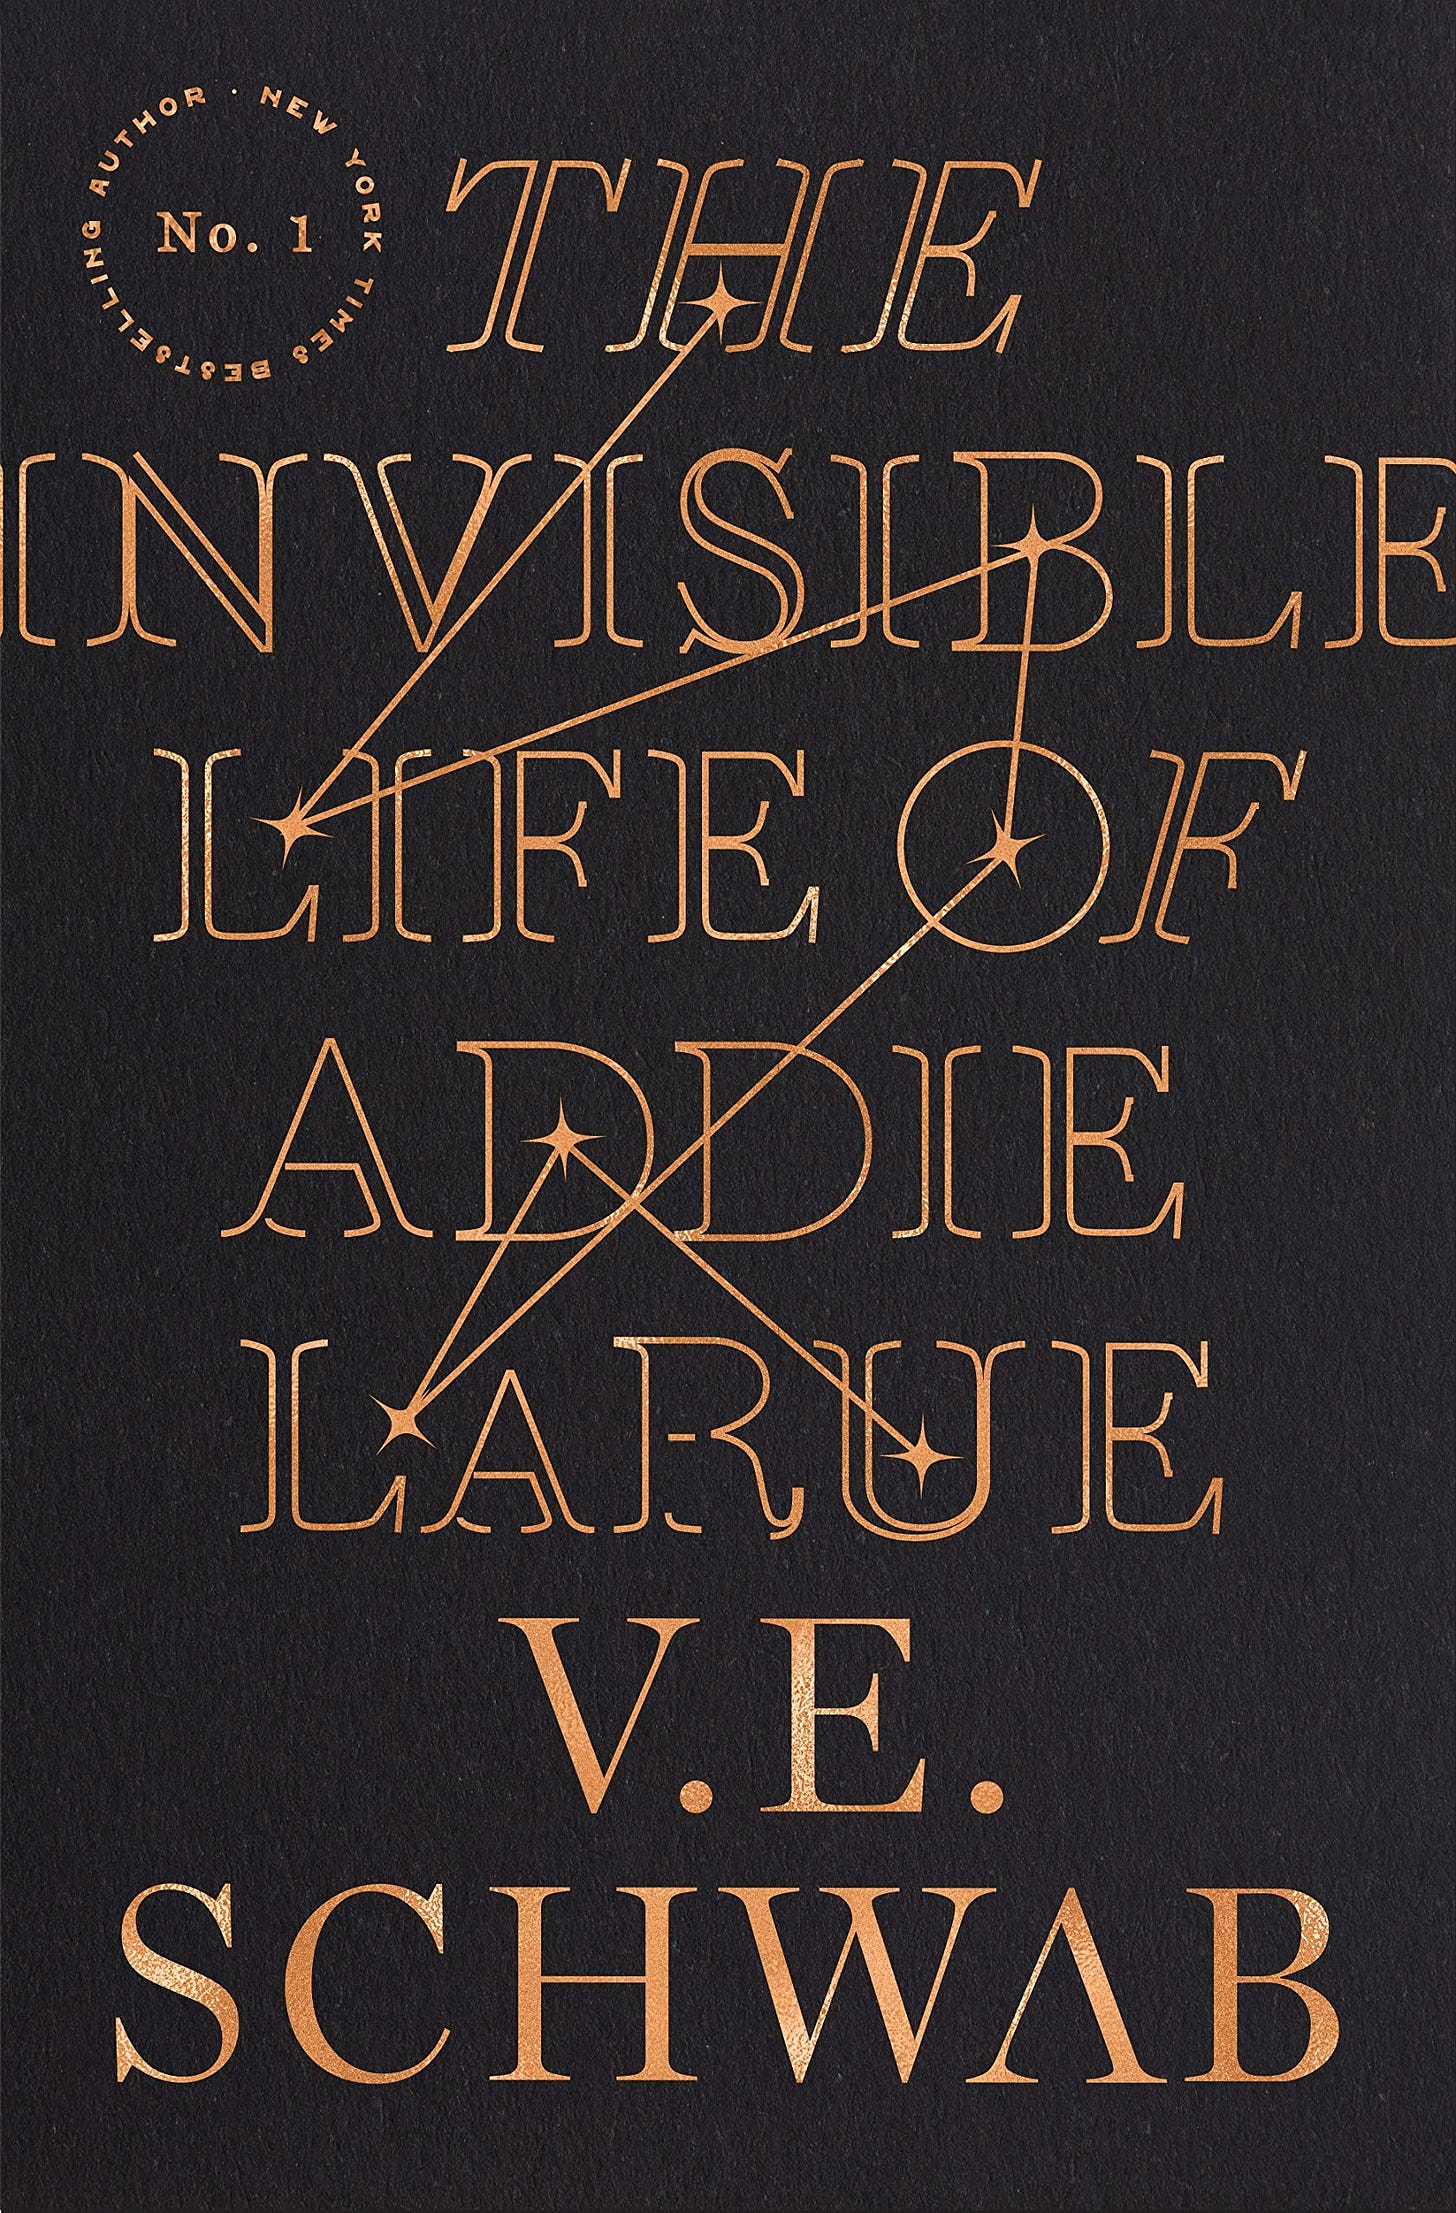 The Invisible Life of Addie LaRue by V.E. Schwab | Goodreads